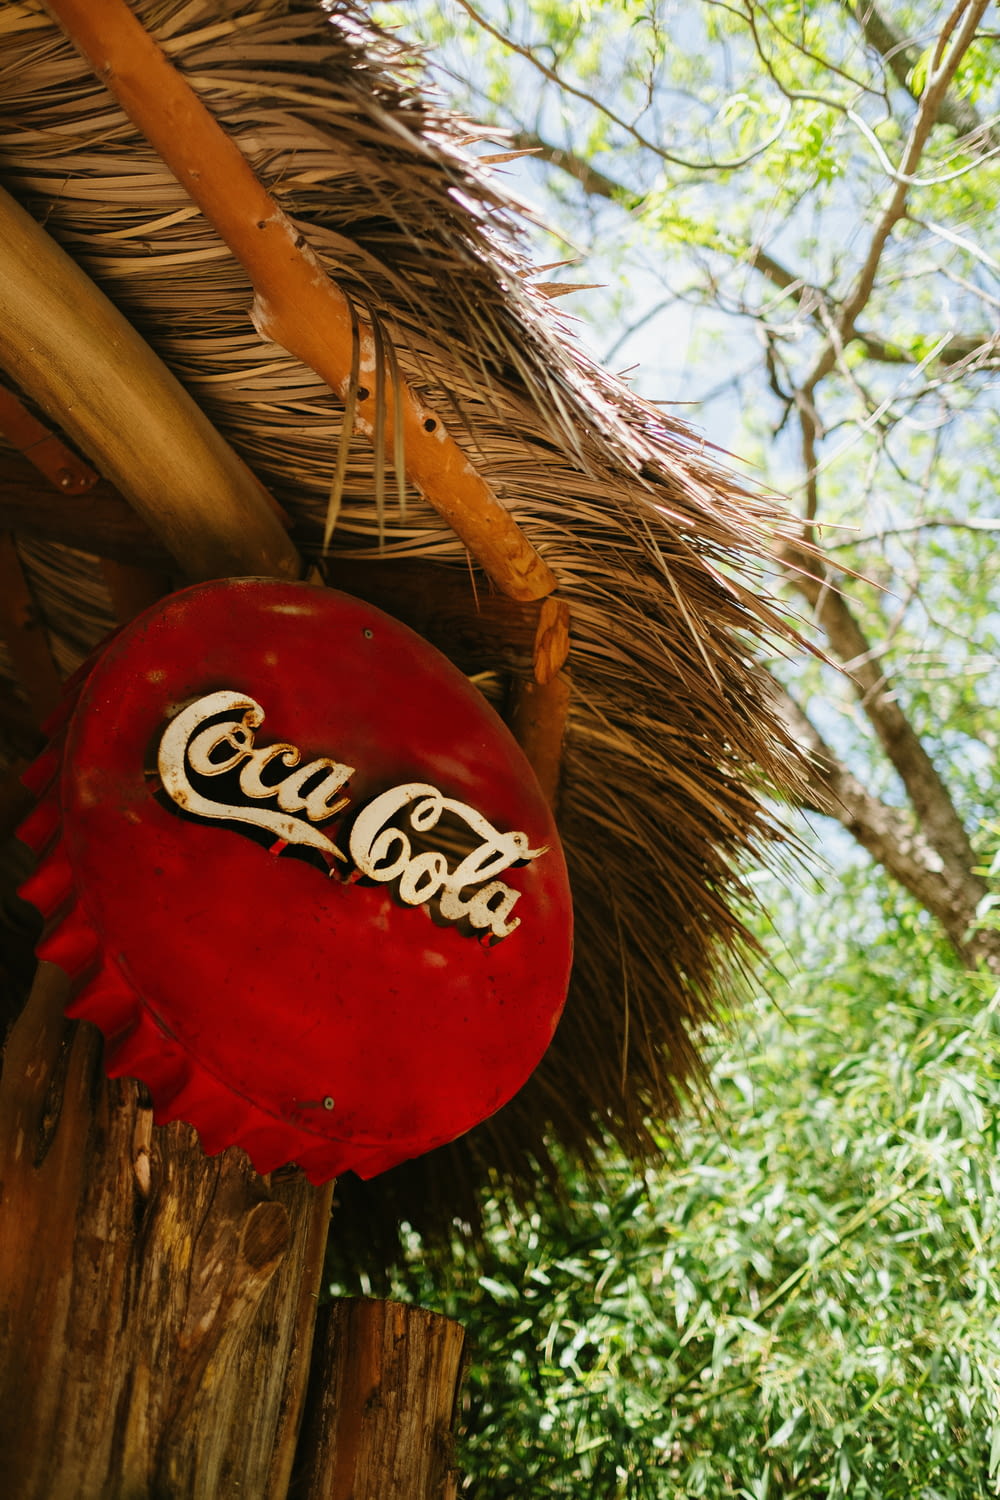 a coca cola sign hanging from a thatched roof